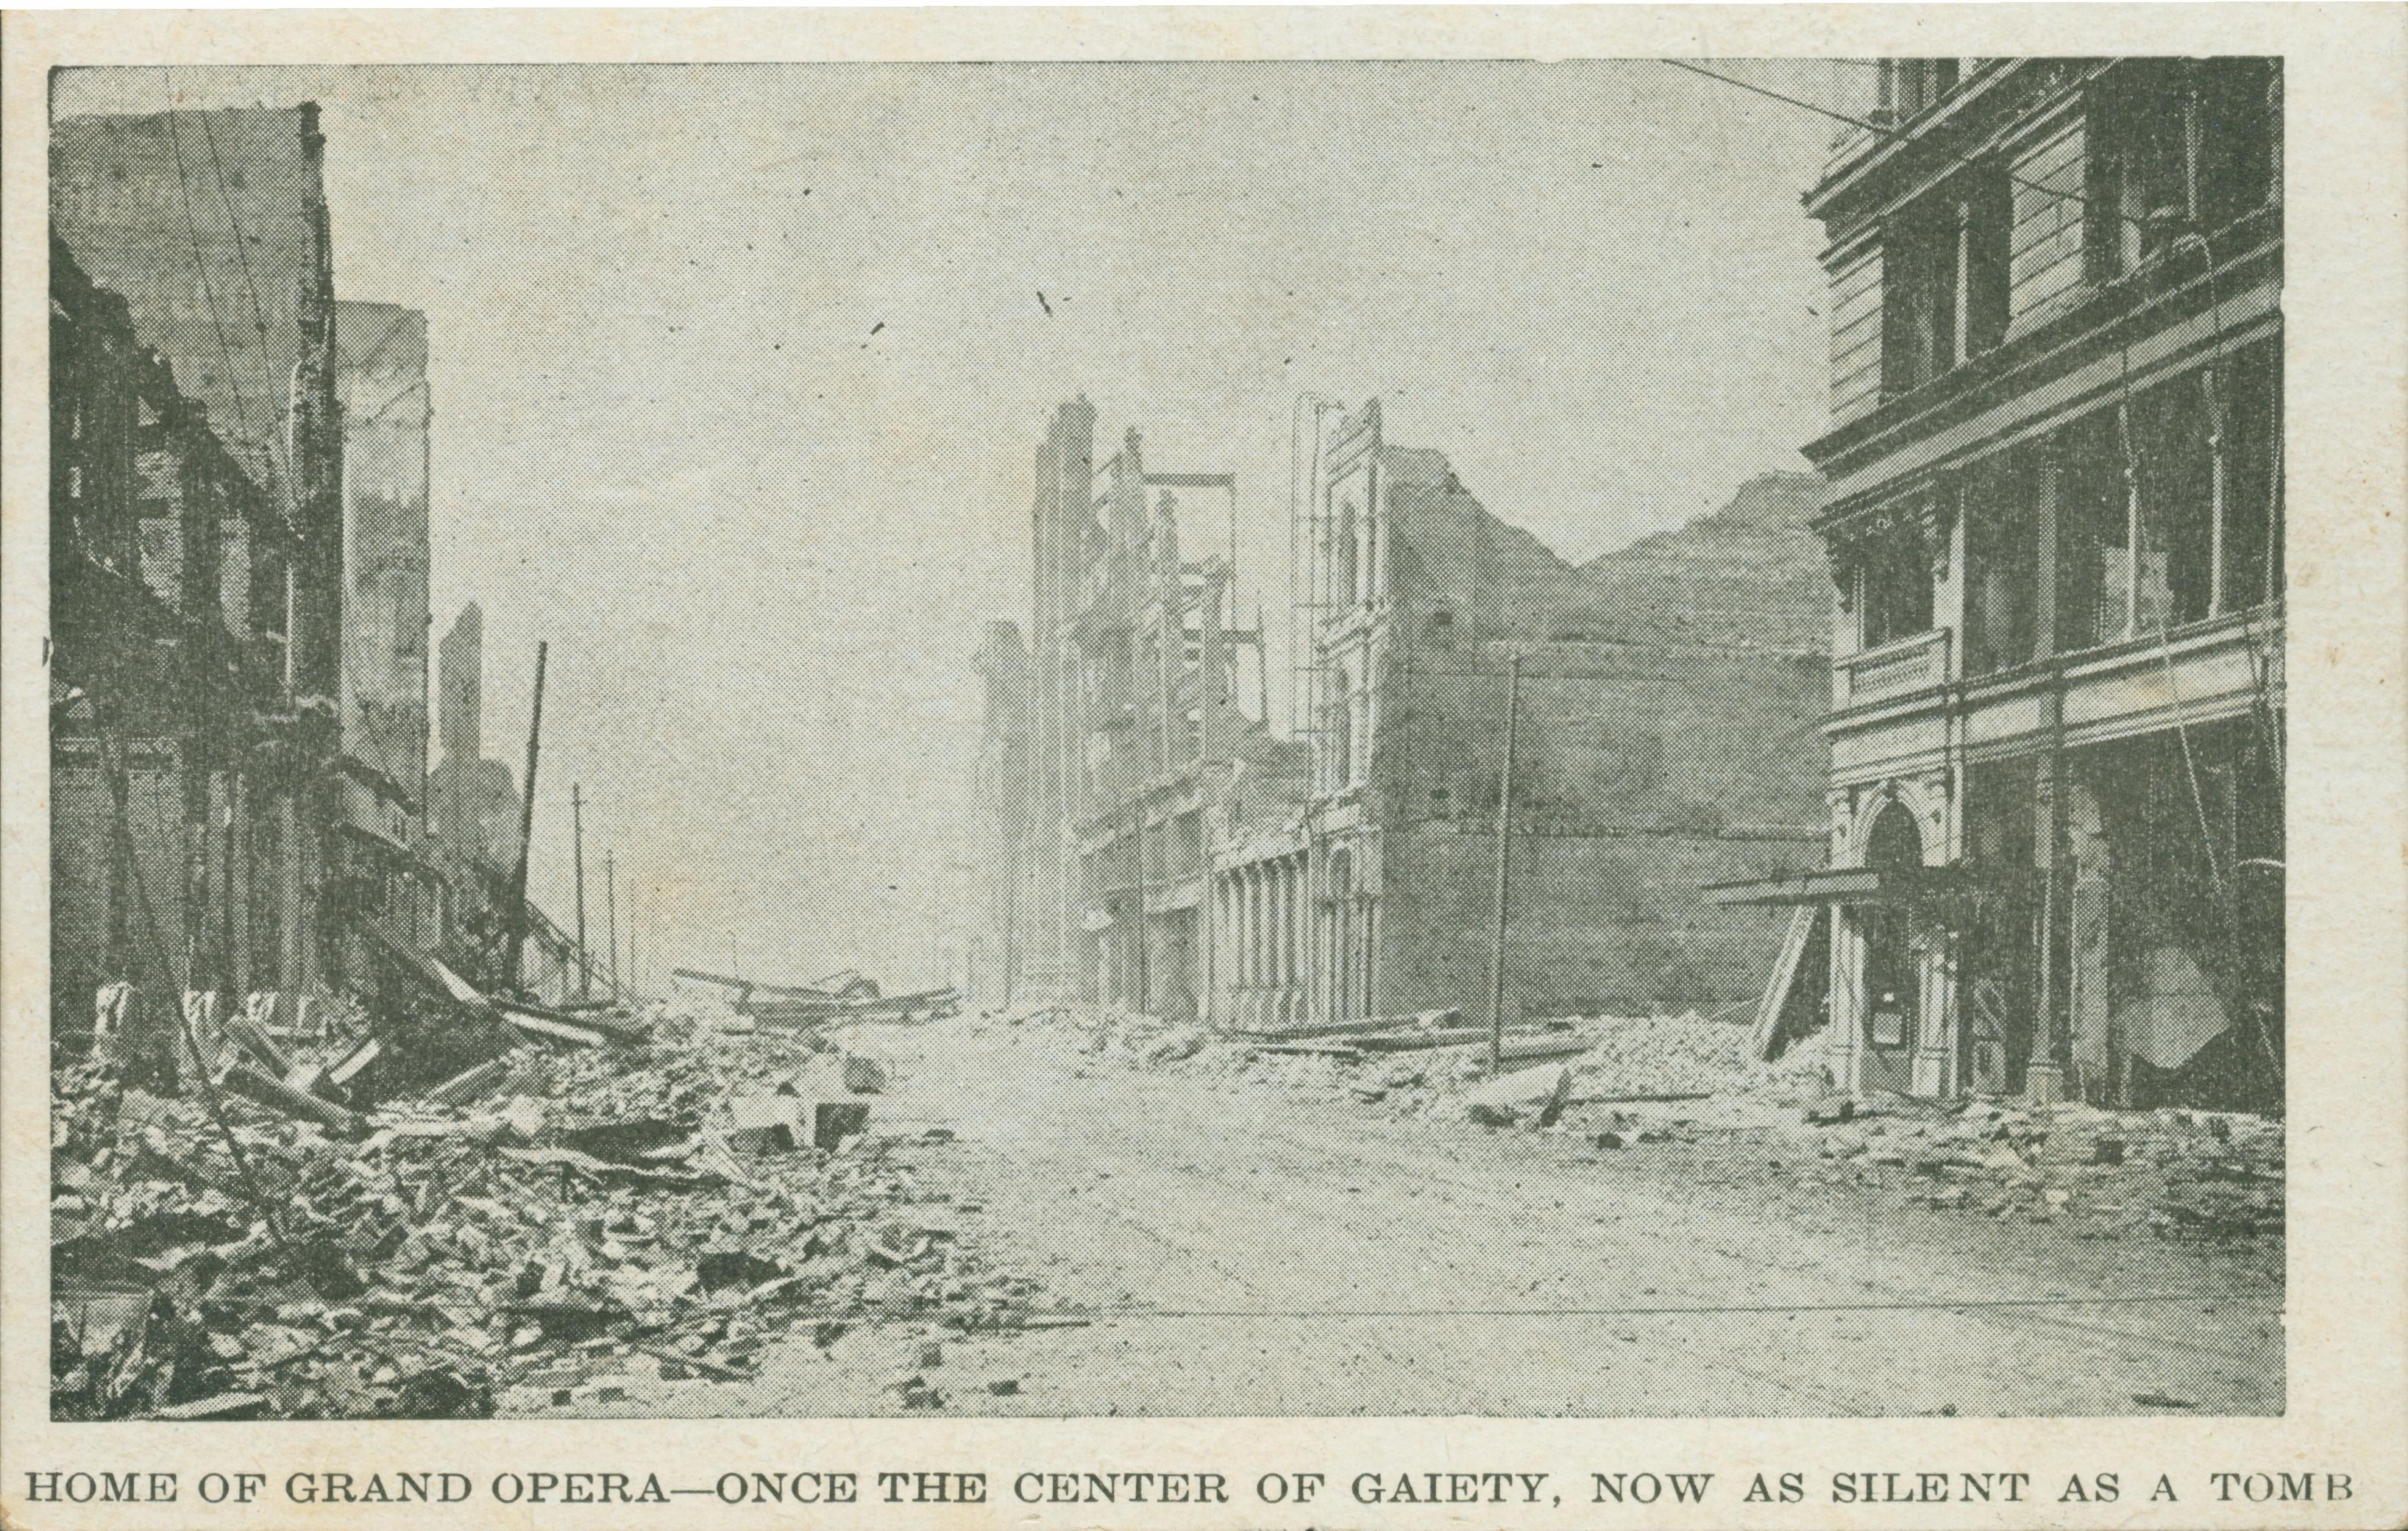 Shows an empty street covered in rubble with collapsed building on either side.